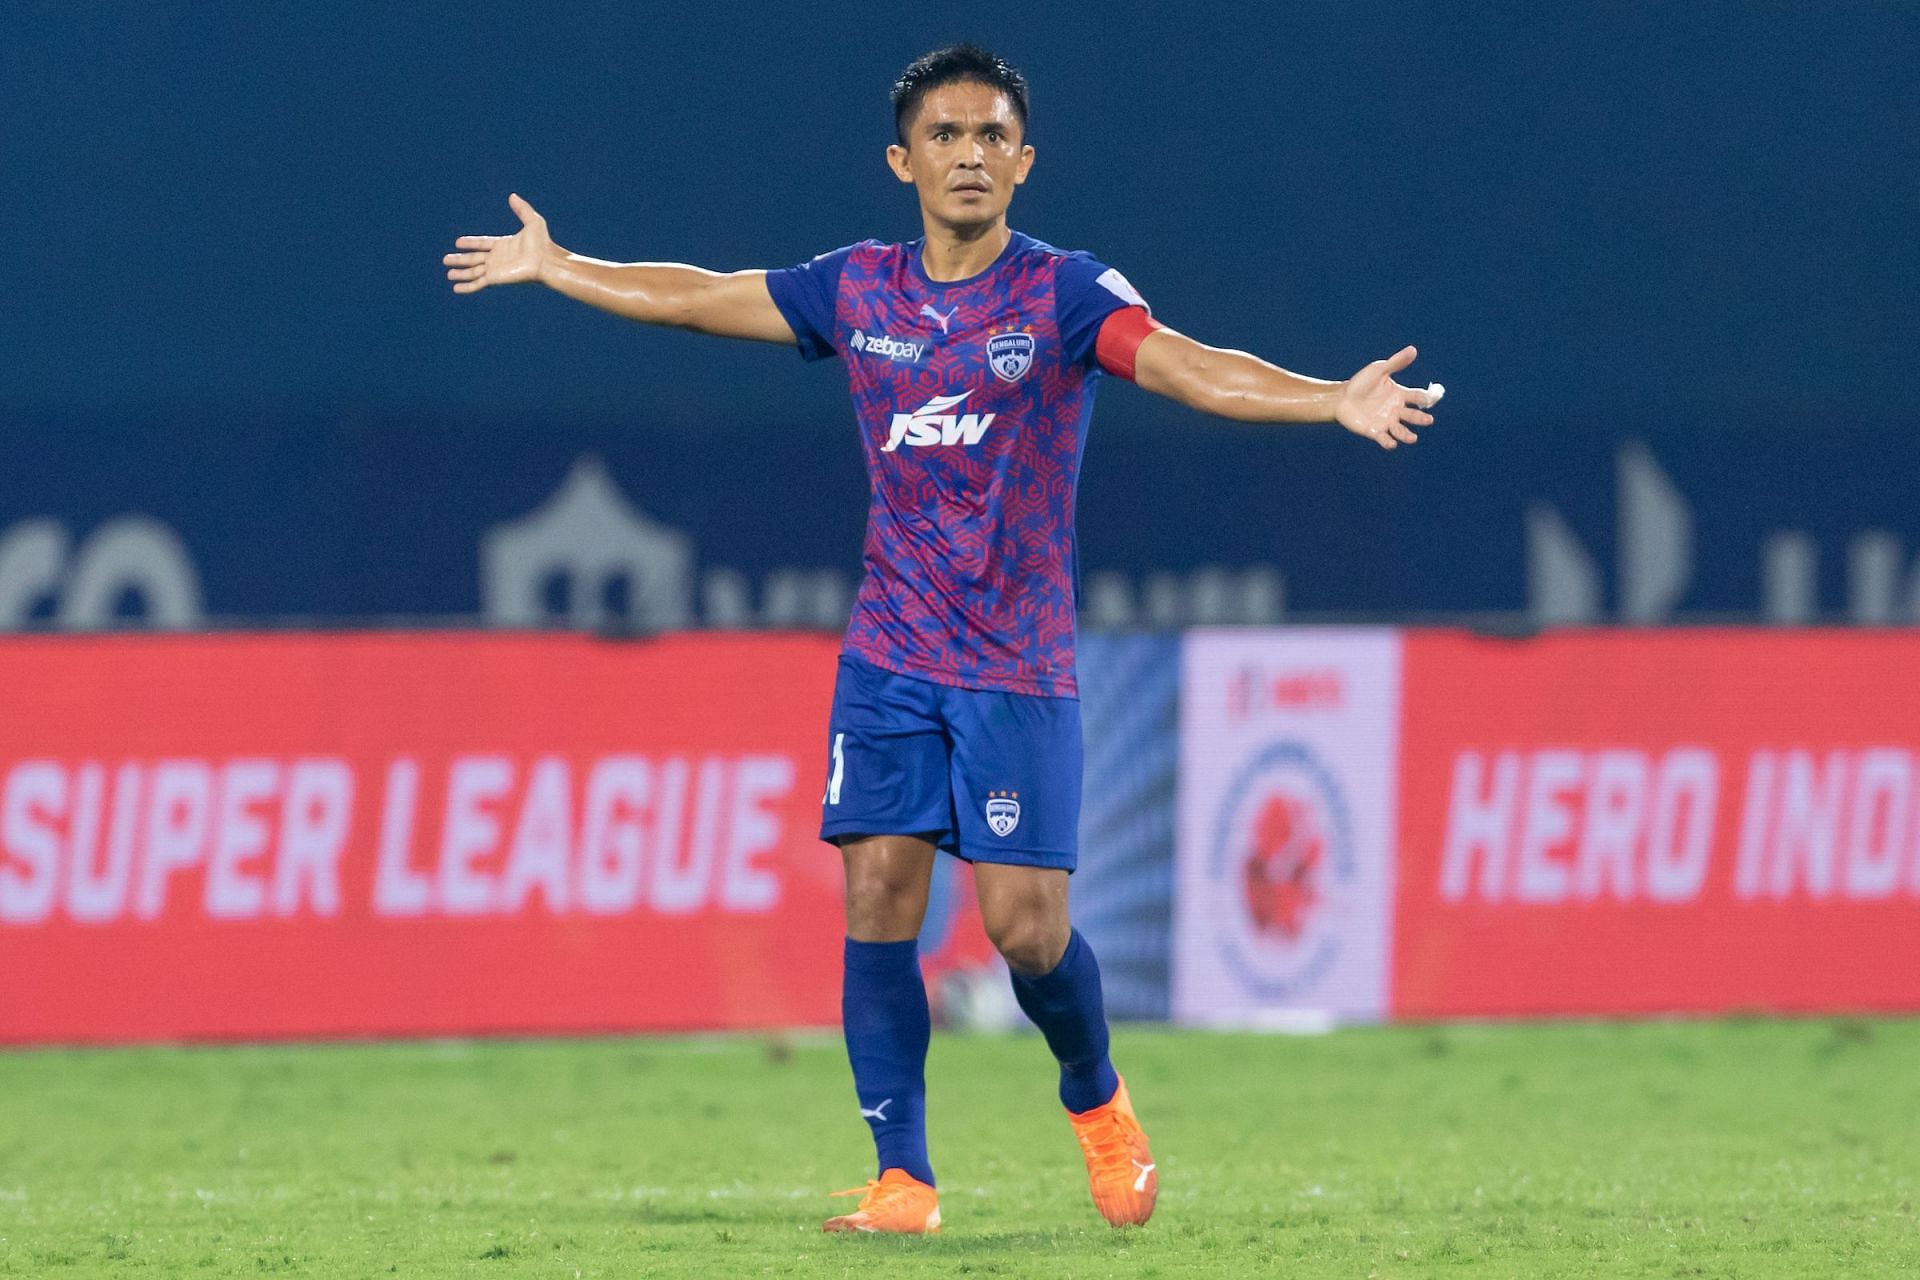 Sunil Chhetri became the first player to reach 50 goals in the ISL (Image courtesy: ISL Media)